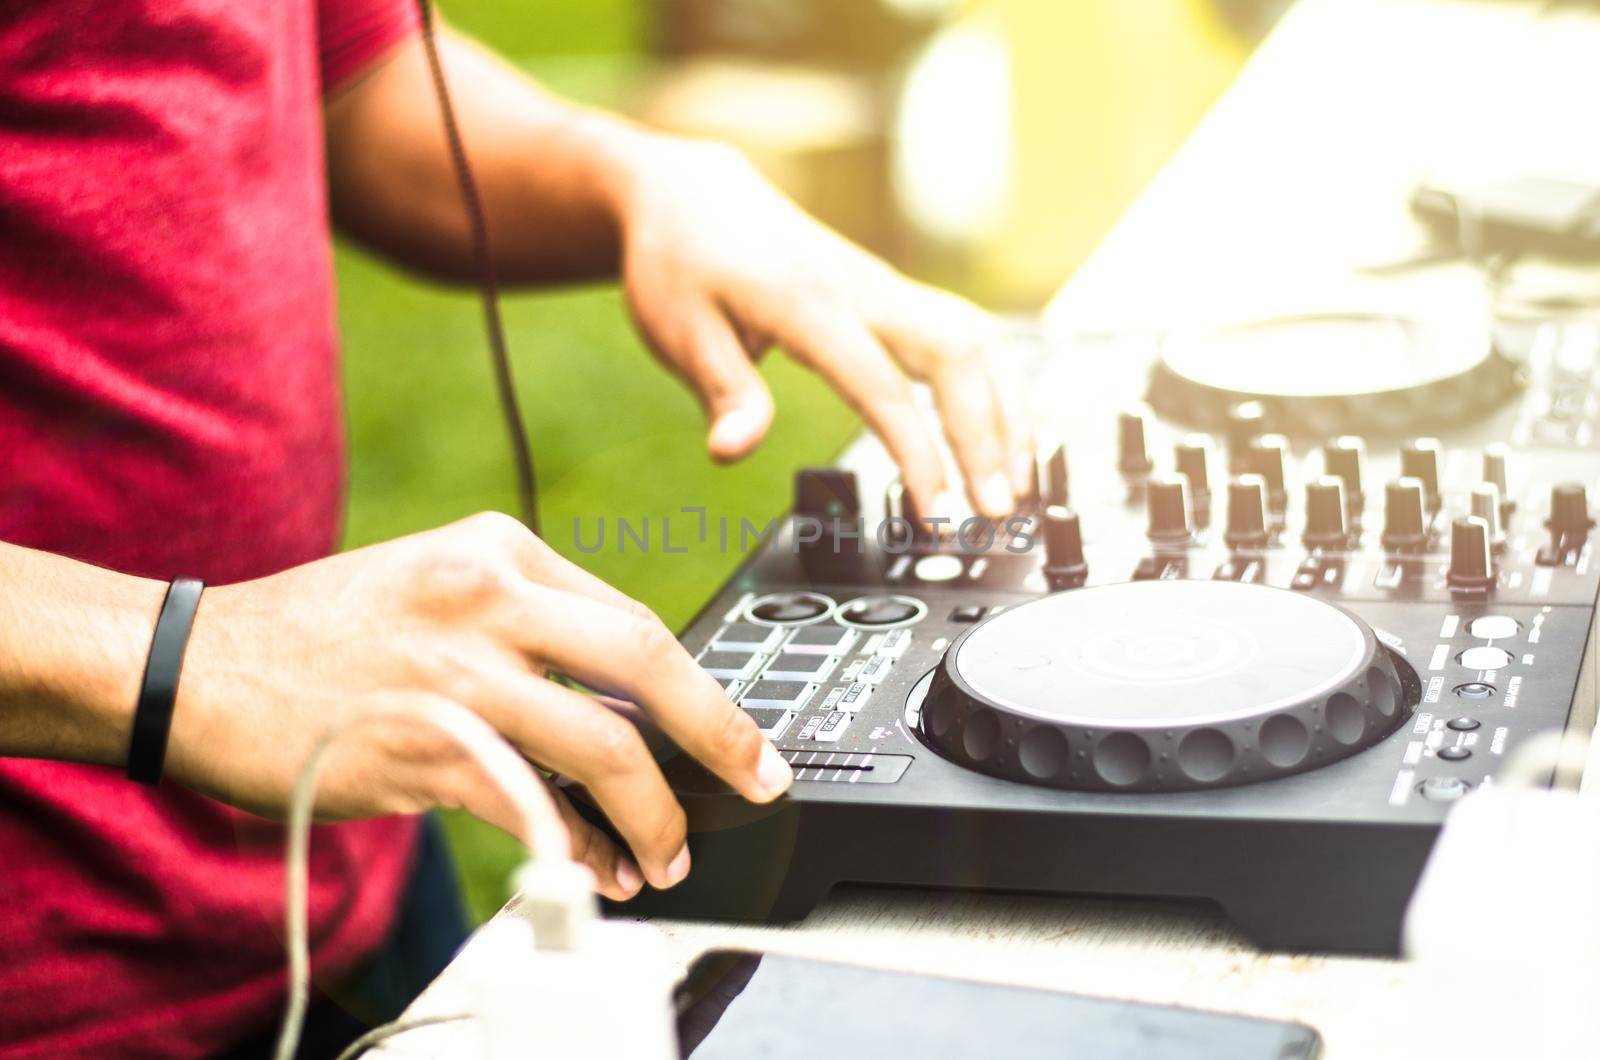 Dj mixing, Deejay playing music mixer audio outdoor - Concept of summer events and club outdoor